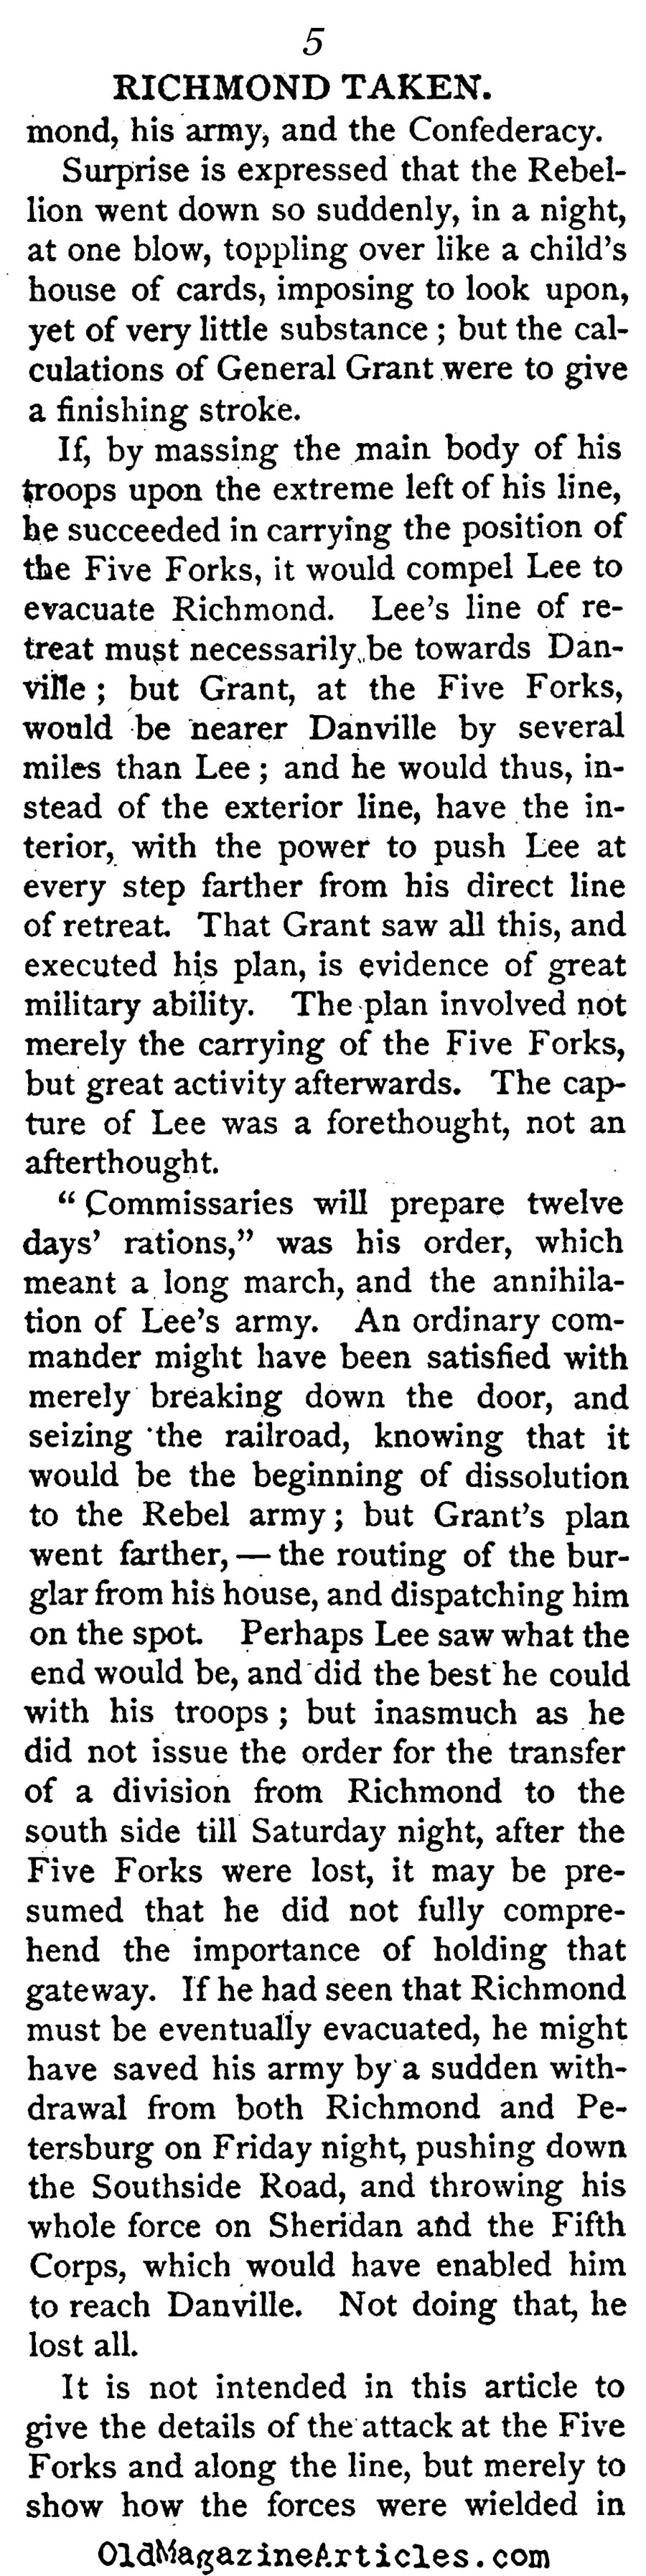  General Grant's March on Richmond (The Atlantic Monthly, 1865)